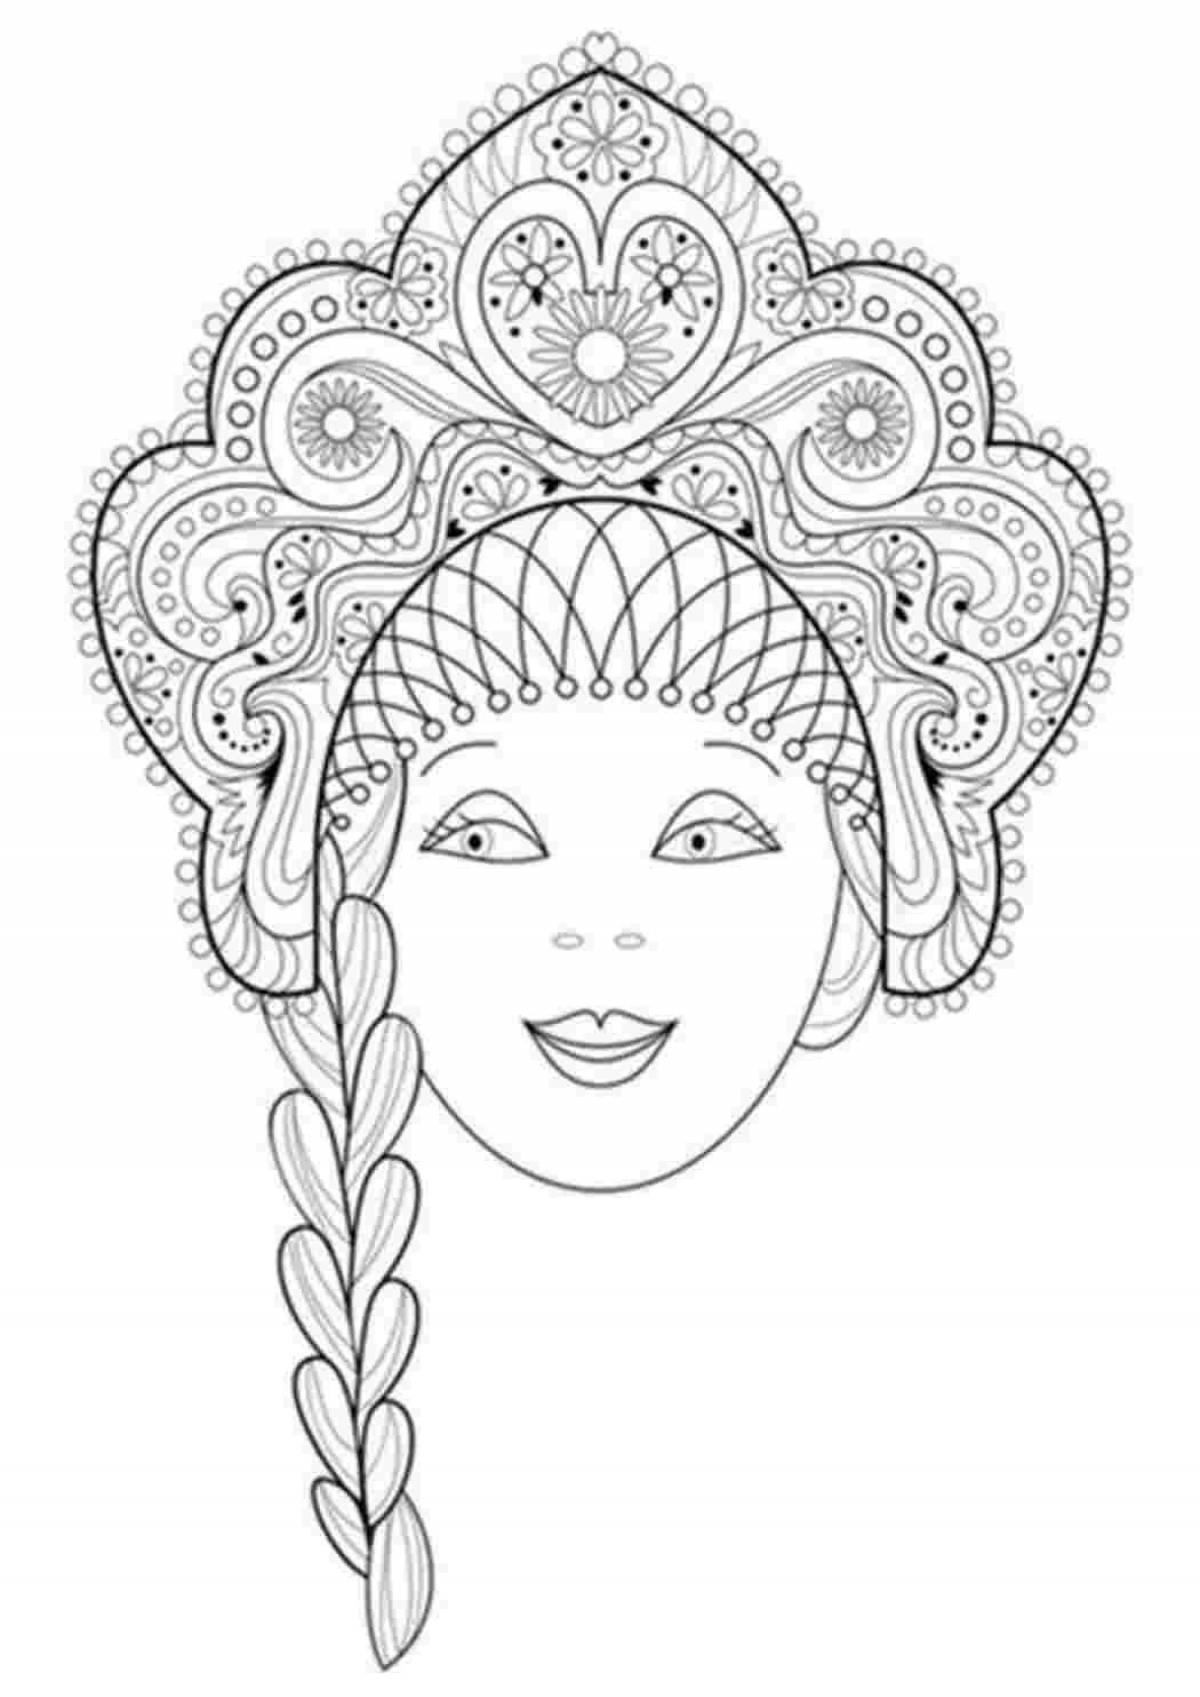 Snow Maiden's wild face coloring page